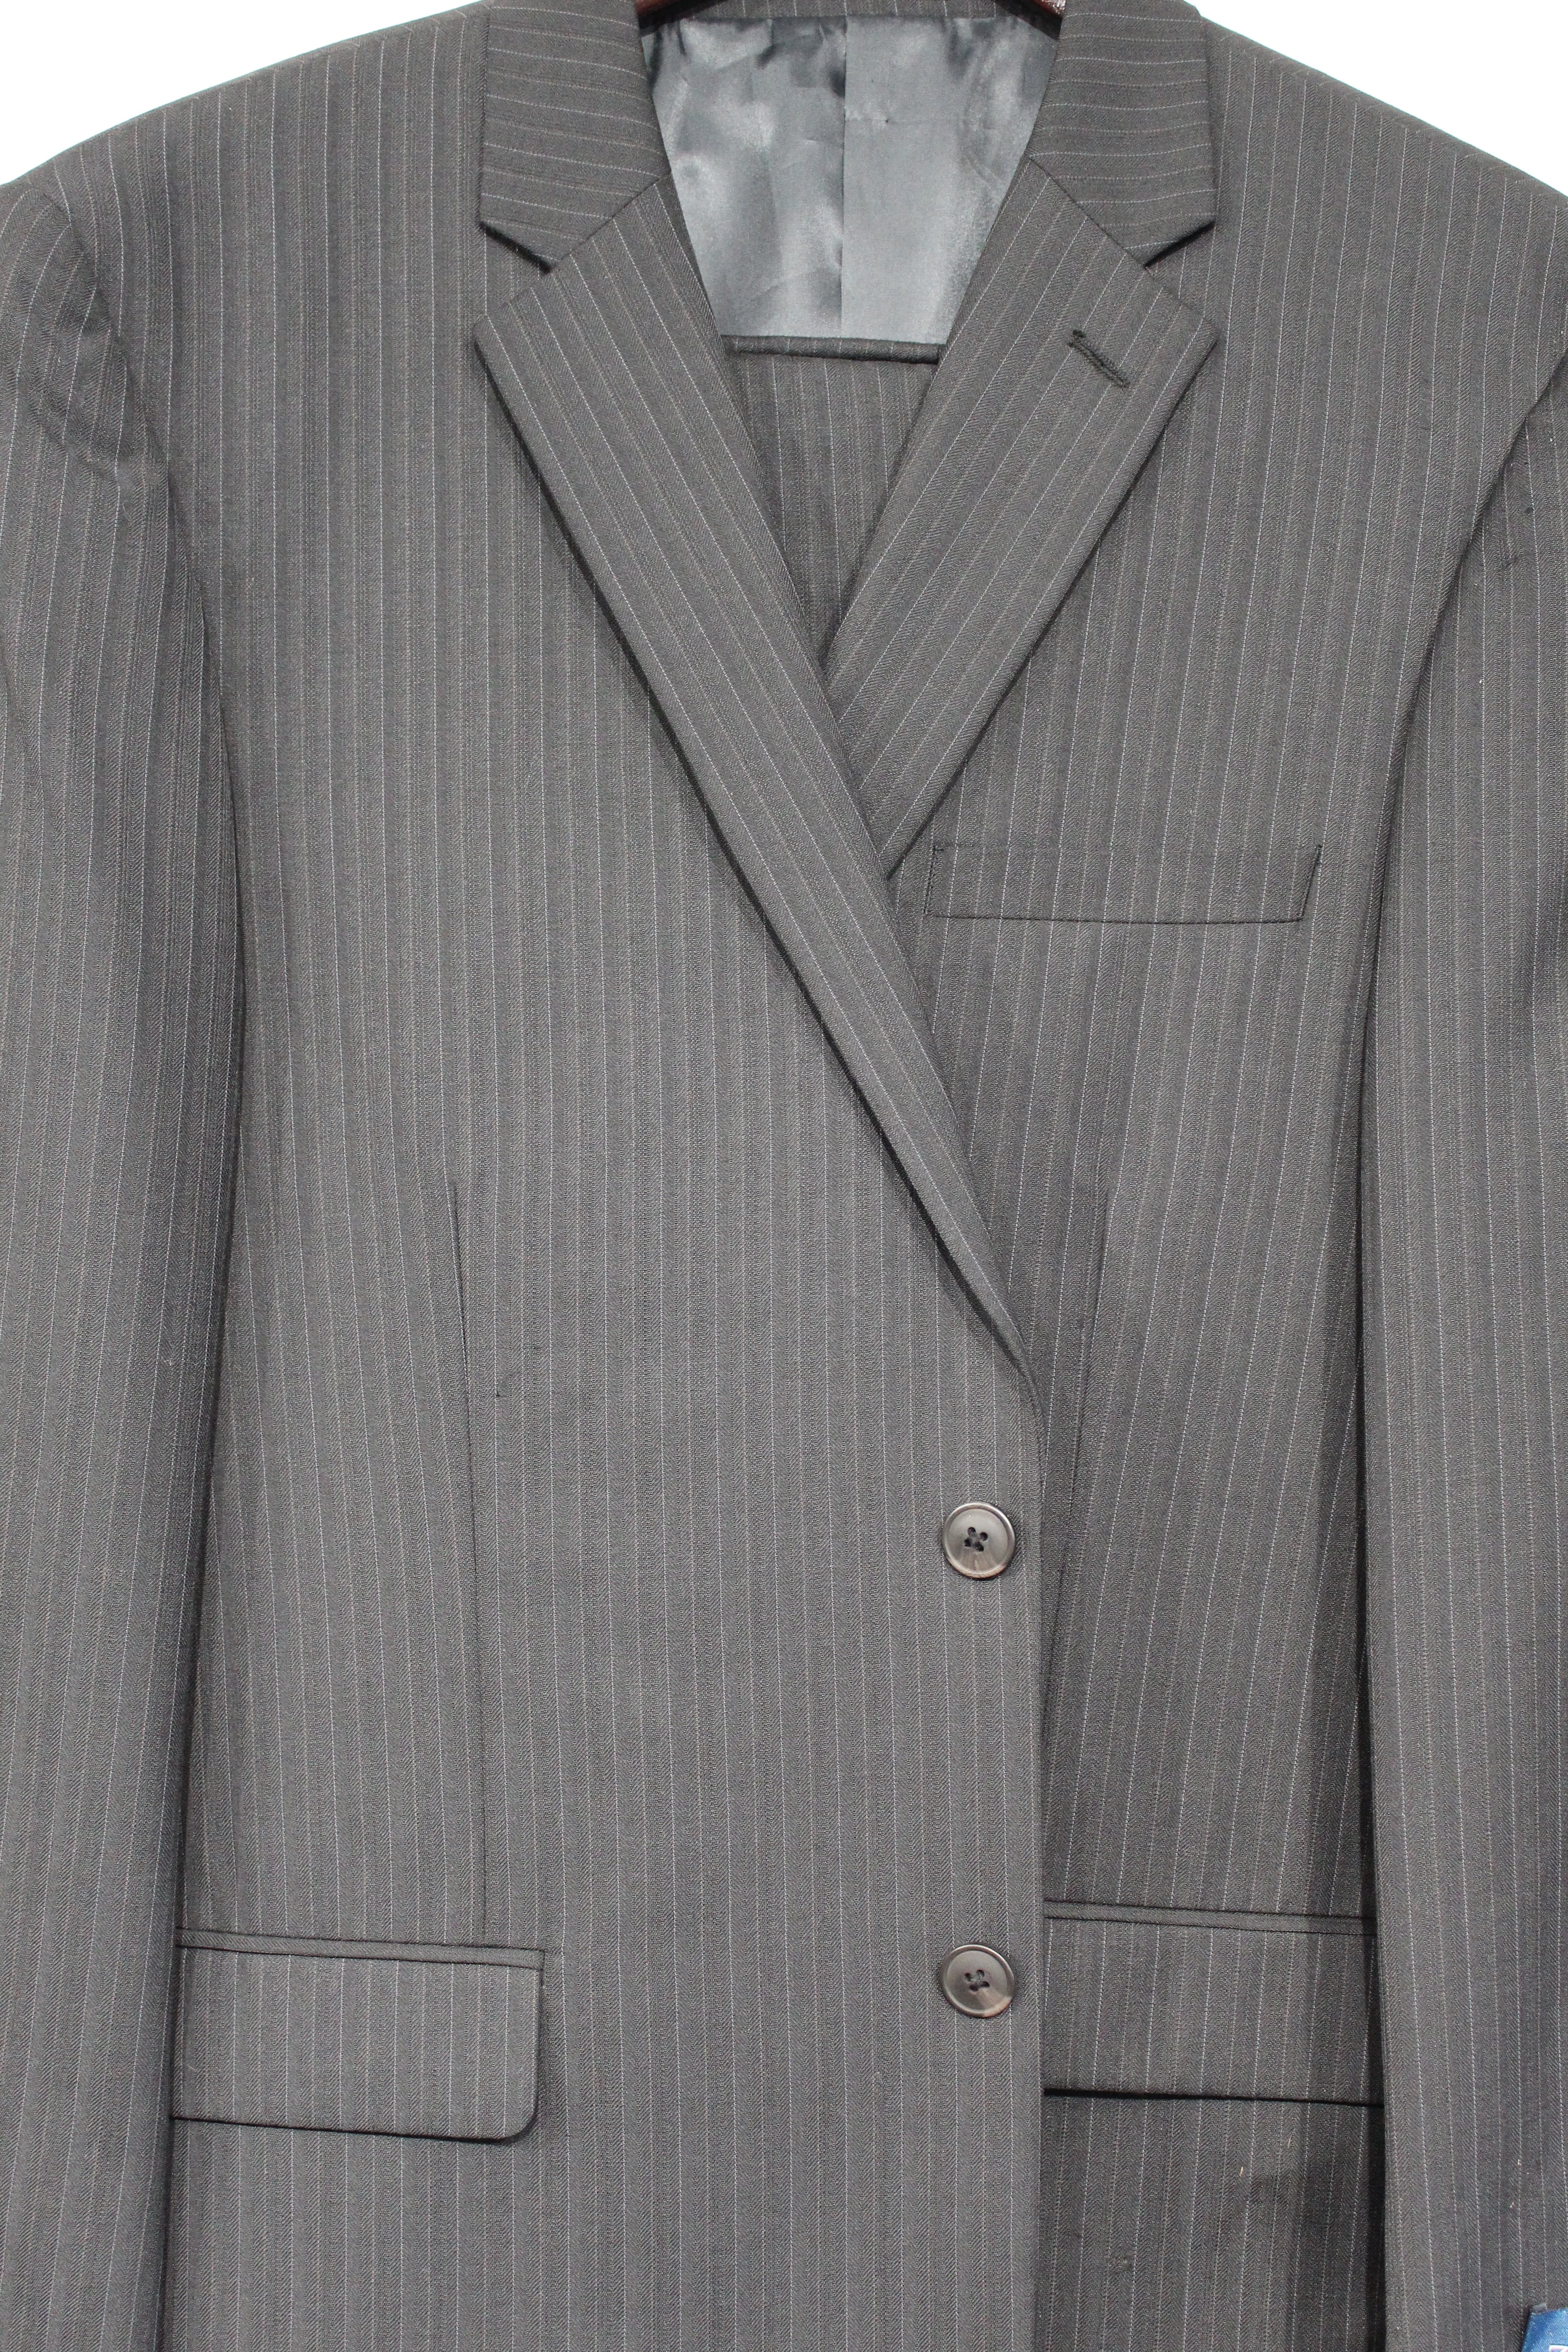 Grey Pinstripe Suit For Men Wool Suits For All Ocassions MW110